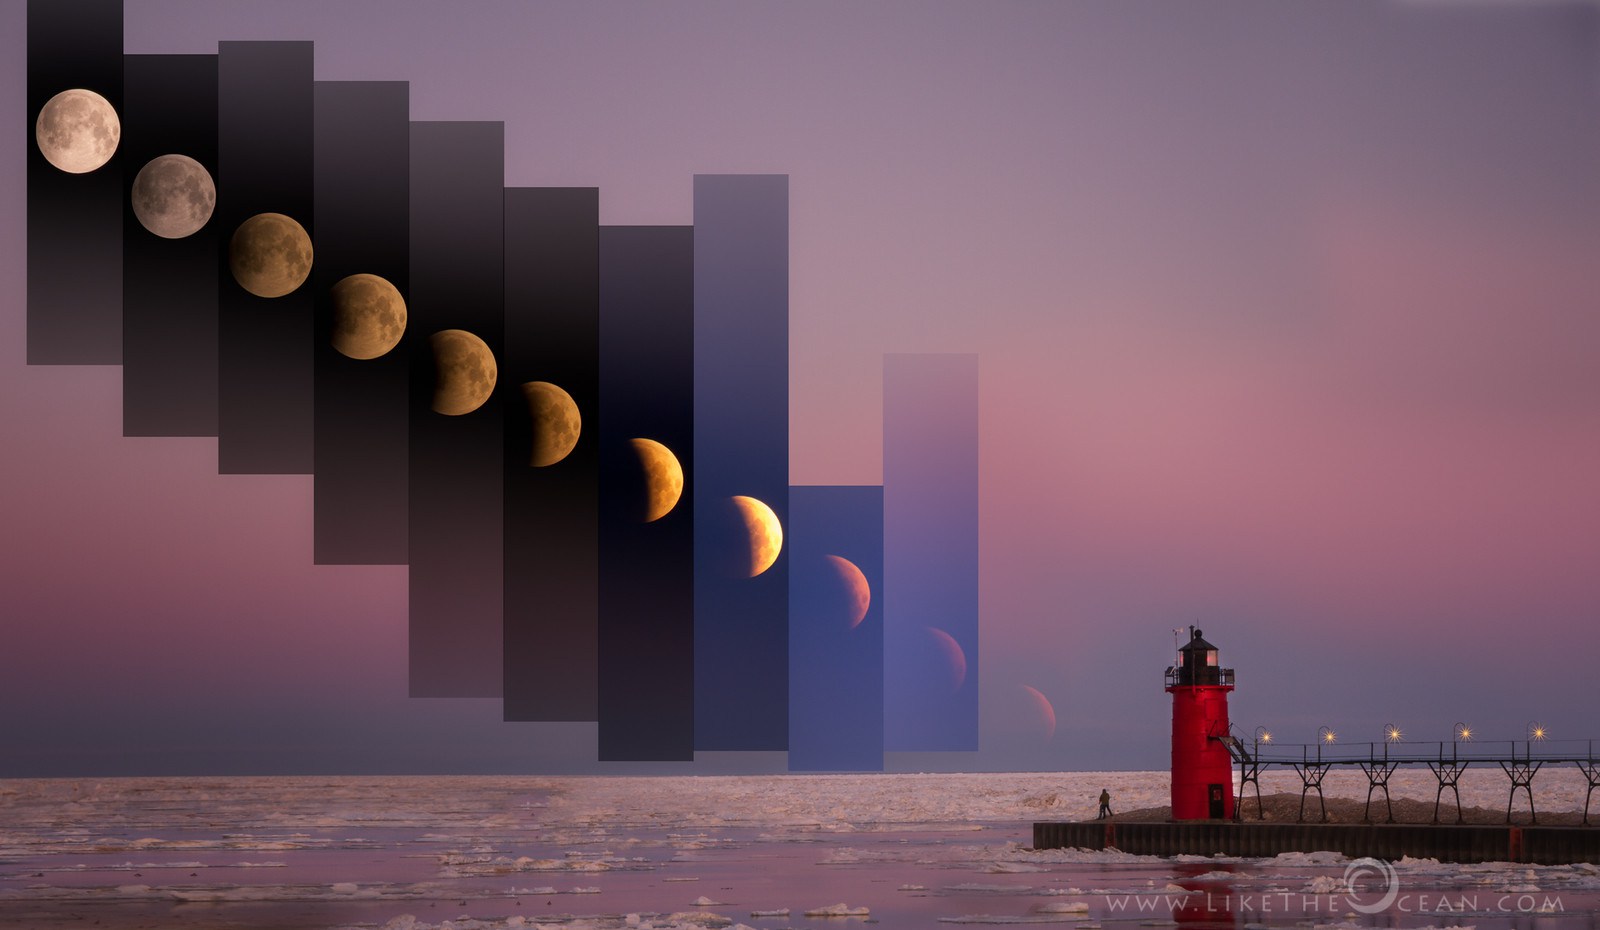 Time Slice of Lunar Eclipse 04.04.2015 South Haven, Michigan, USA